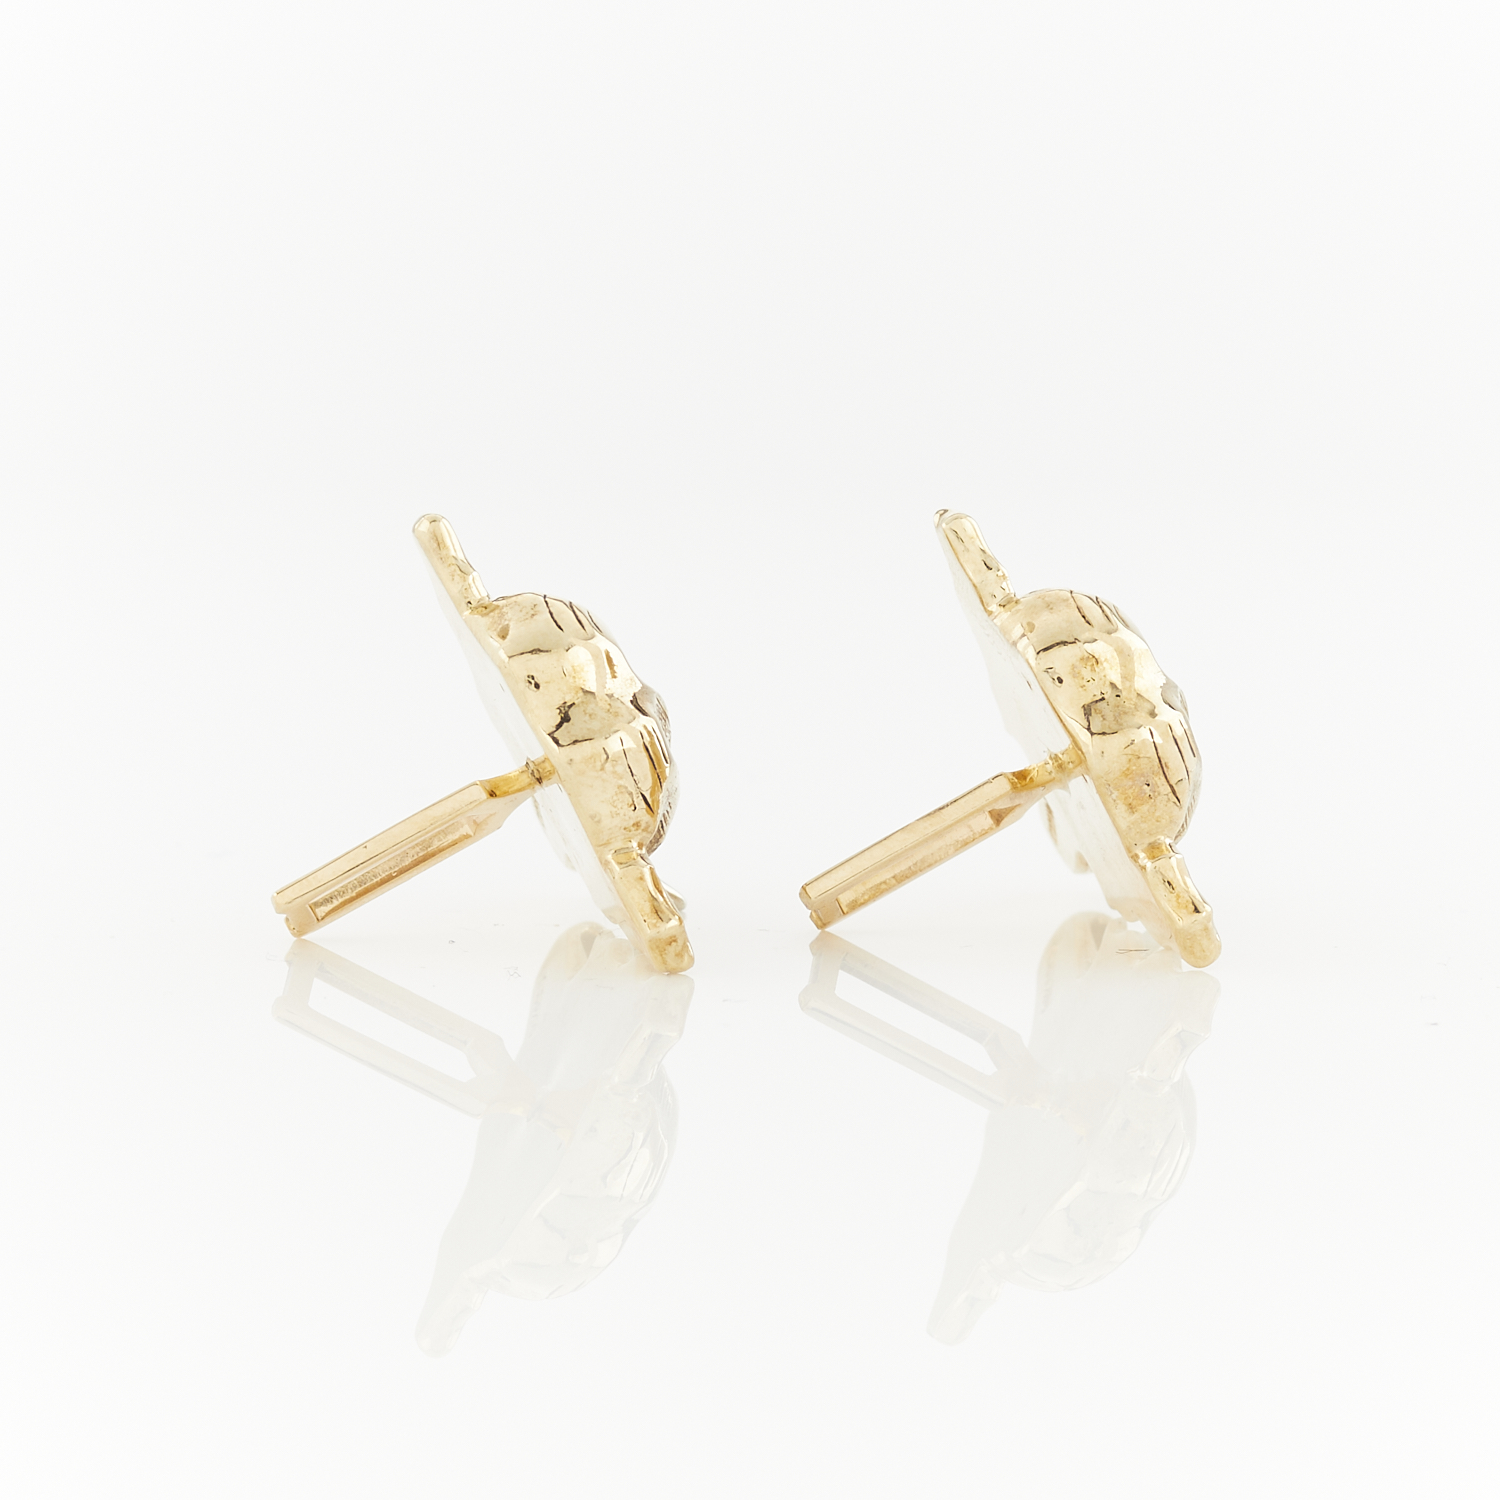 Pair of 14k Elephant Cuff Links - Image 9 of 9